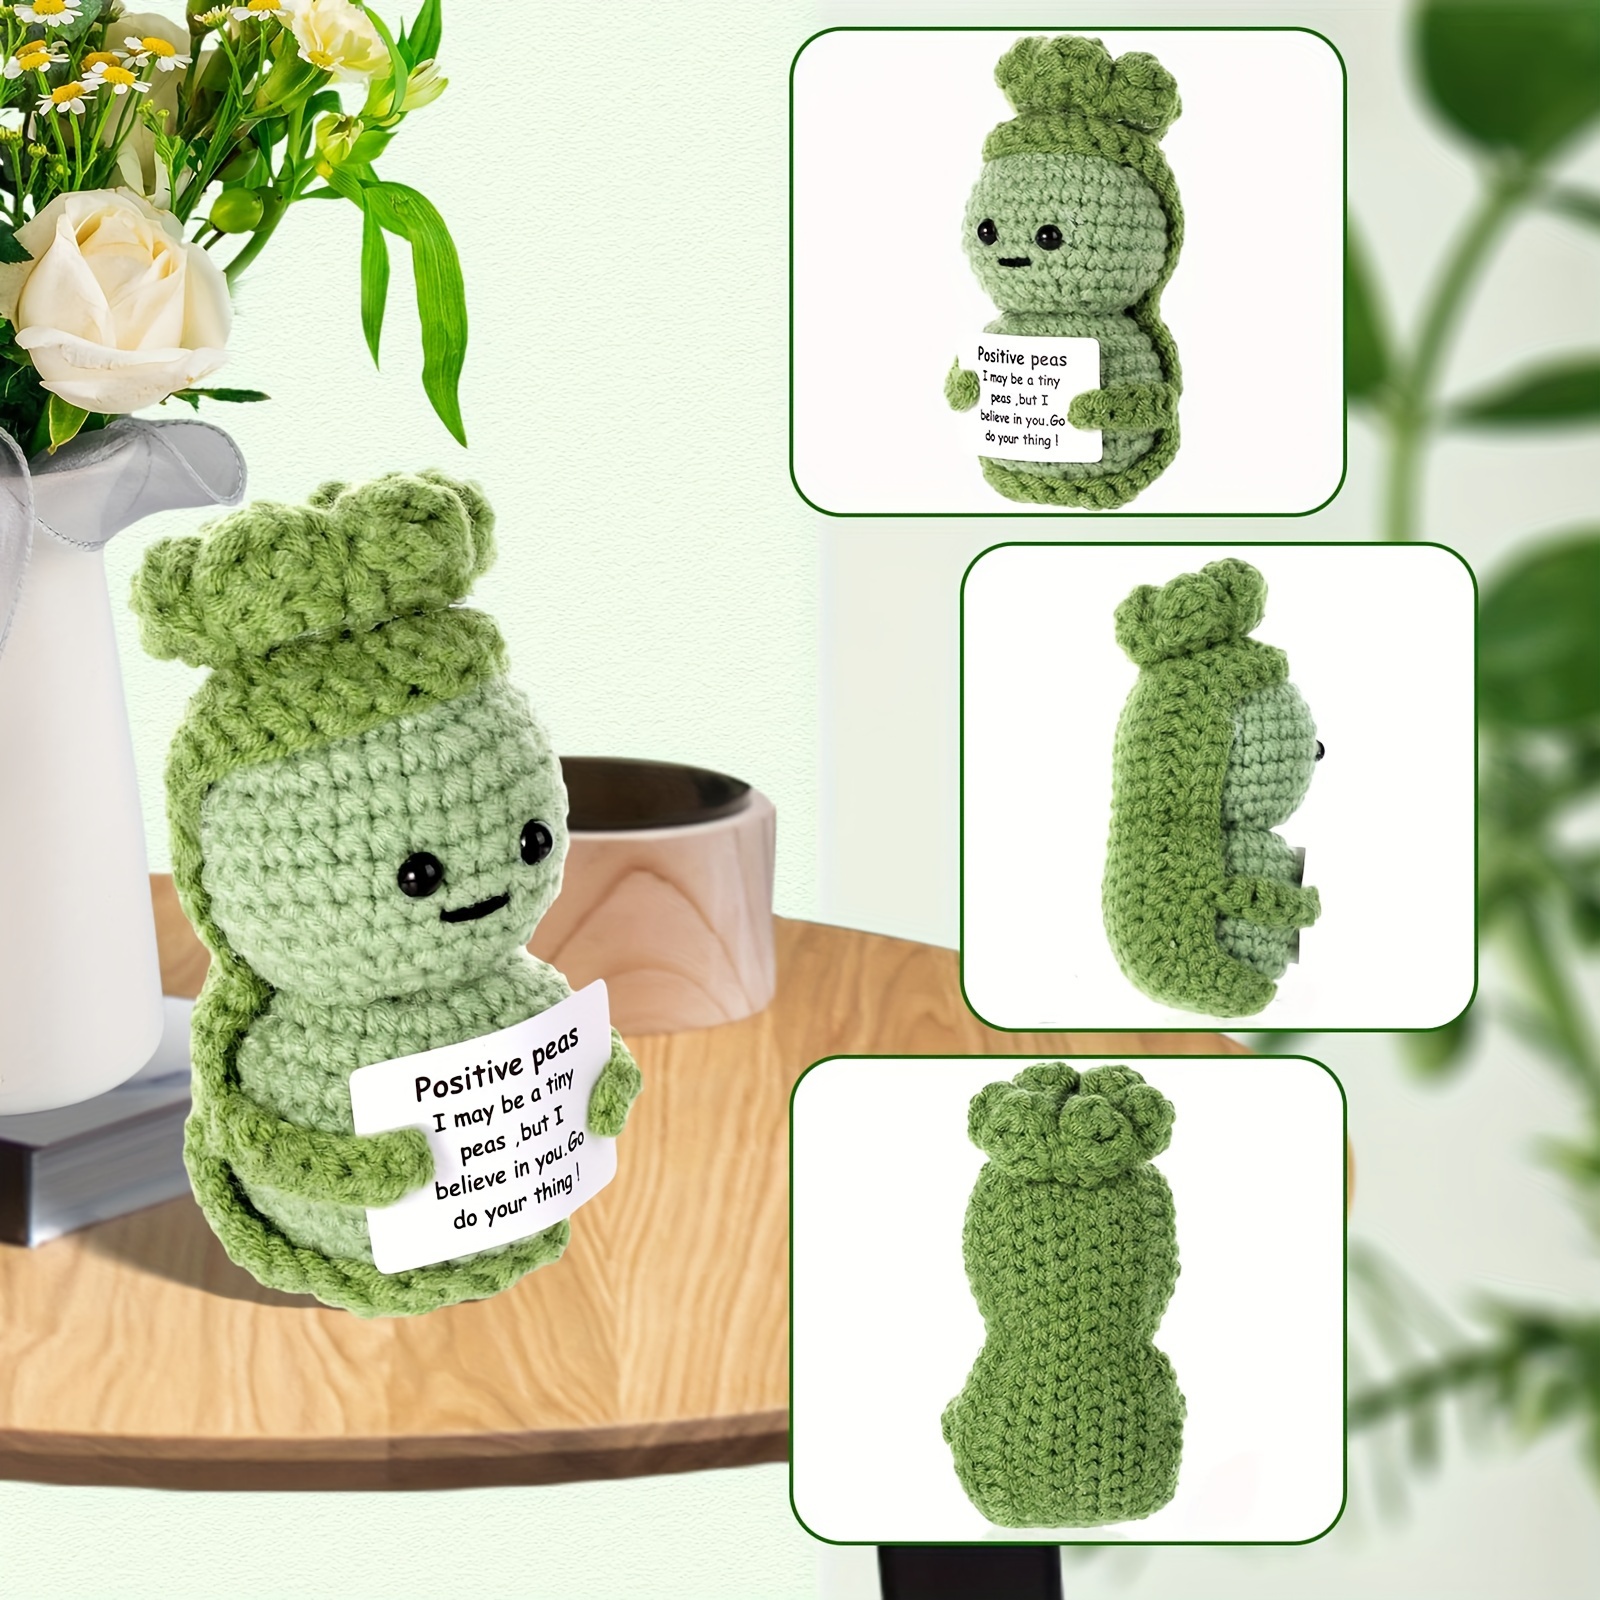 Emotional Support Pickle Green Cucumber Doll Woven Positive - Temu